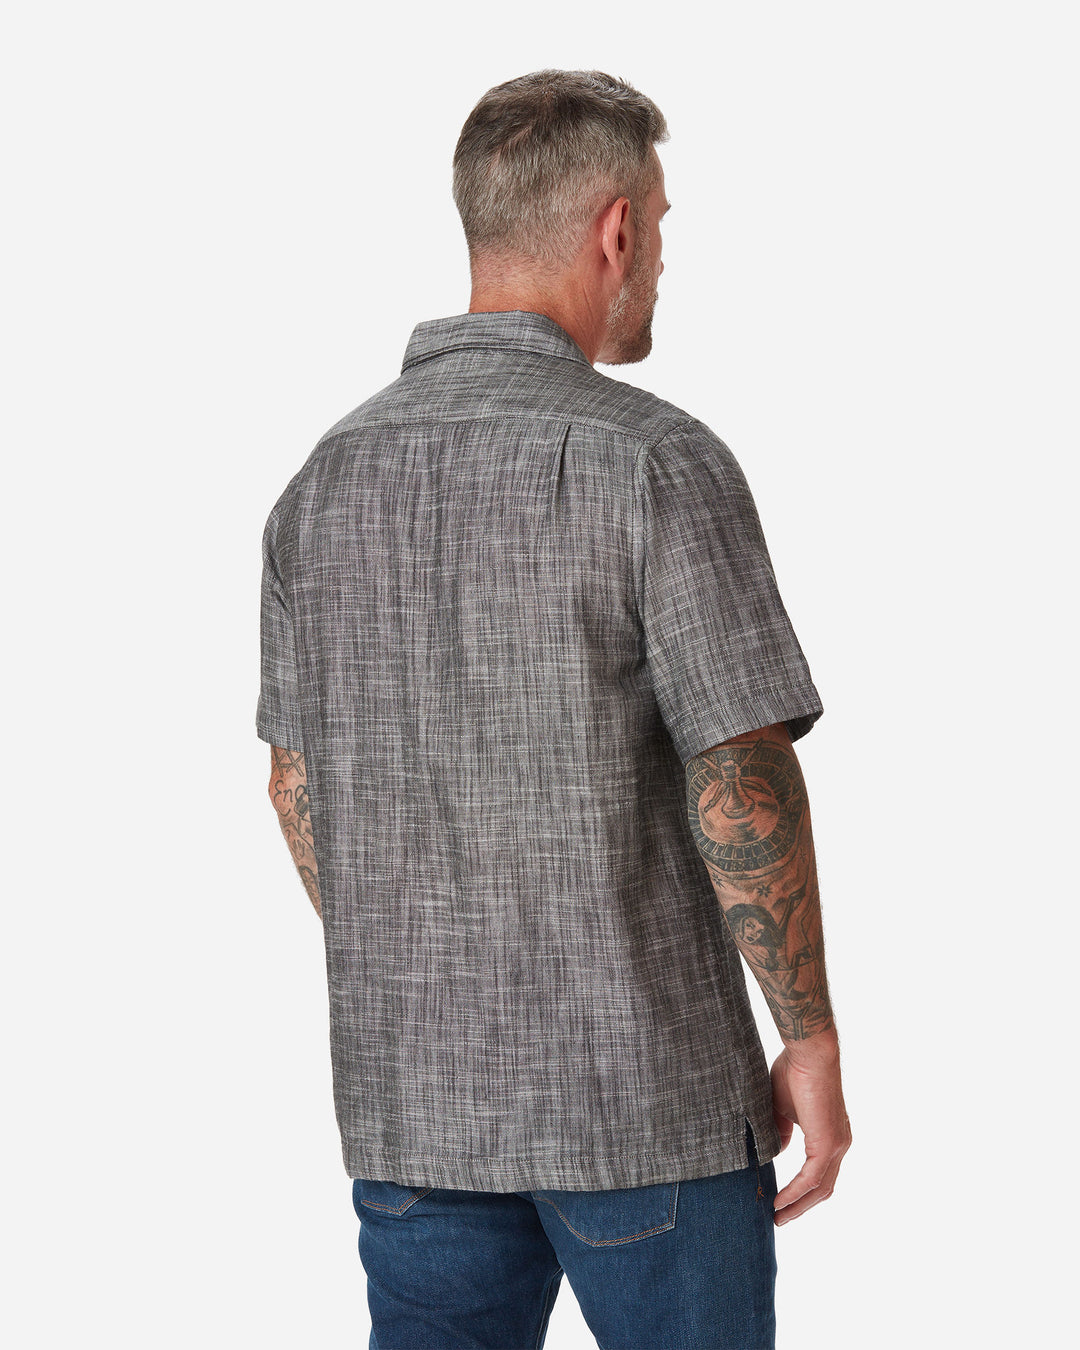 Back of model wearing Ace Rivington "Black" Double gauze soft-textured cotton fabric camp collar shirt with coconut buttons and left-breast pocket and a pair of Ace Rivington dark vintage blue denim jeans